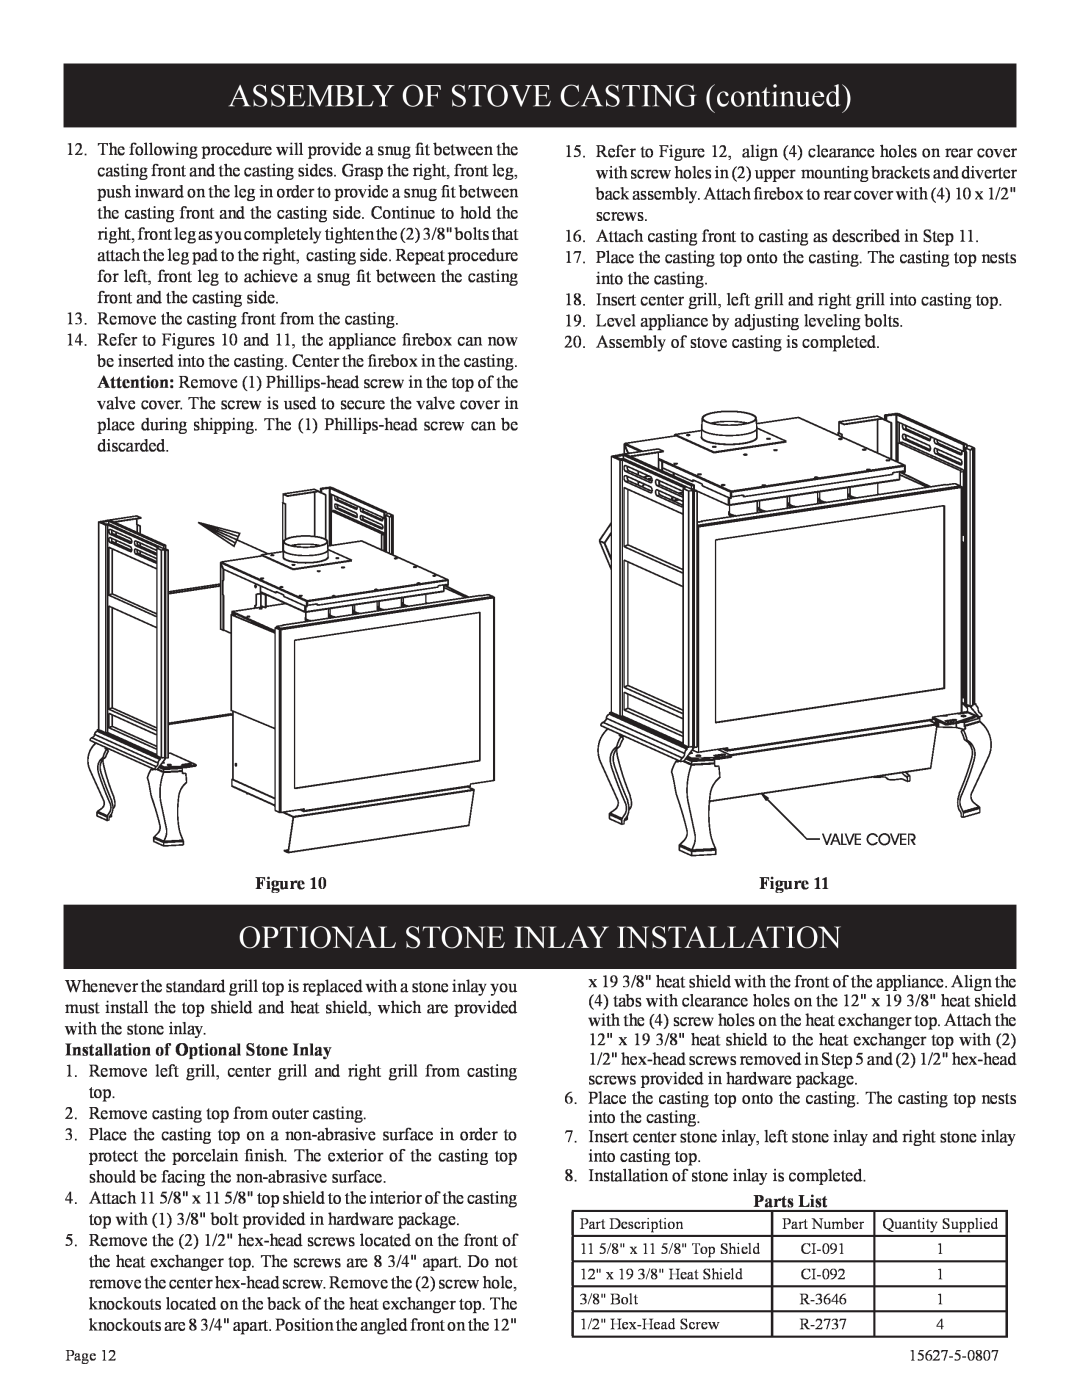 Empire Comfort Systems CIBV-30-20 ASSEMBLY OF STOVE CASTING continued, Optional Stone Inlay Installation, Parts List 